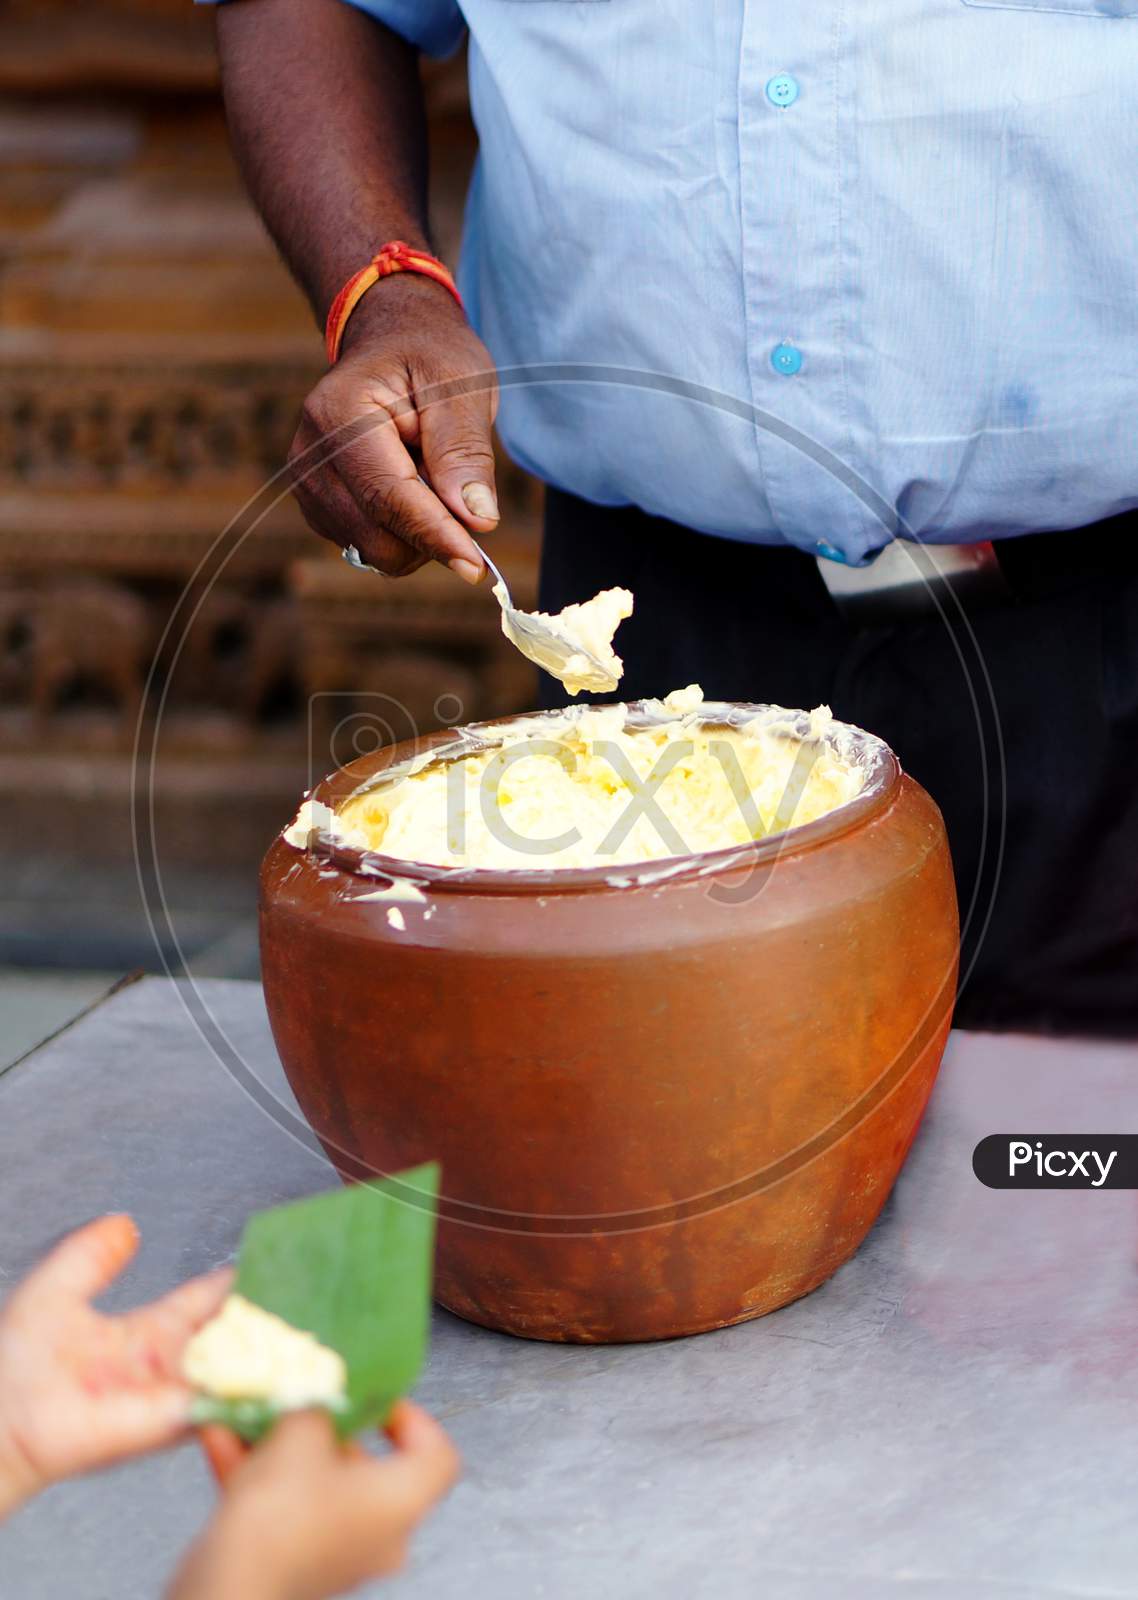 Indian Hindu Distributing Prasad Butter To Devotees To Eat As Blessed Food By God During Krishnastami Festival